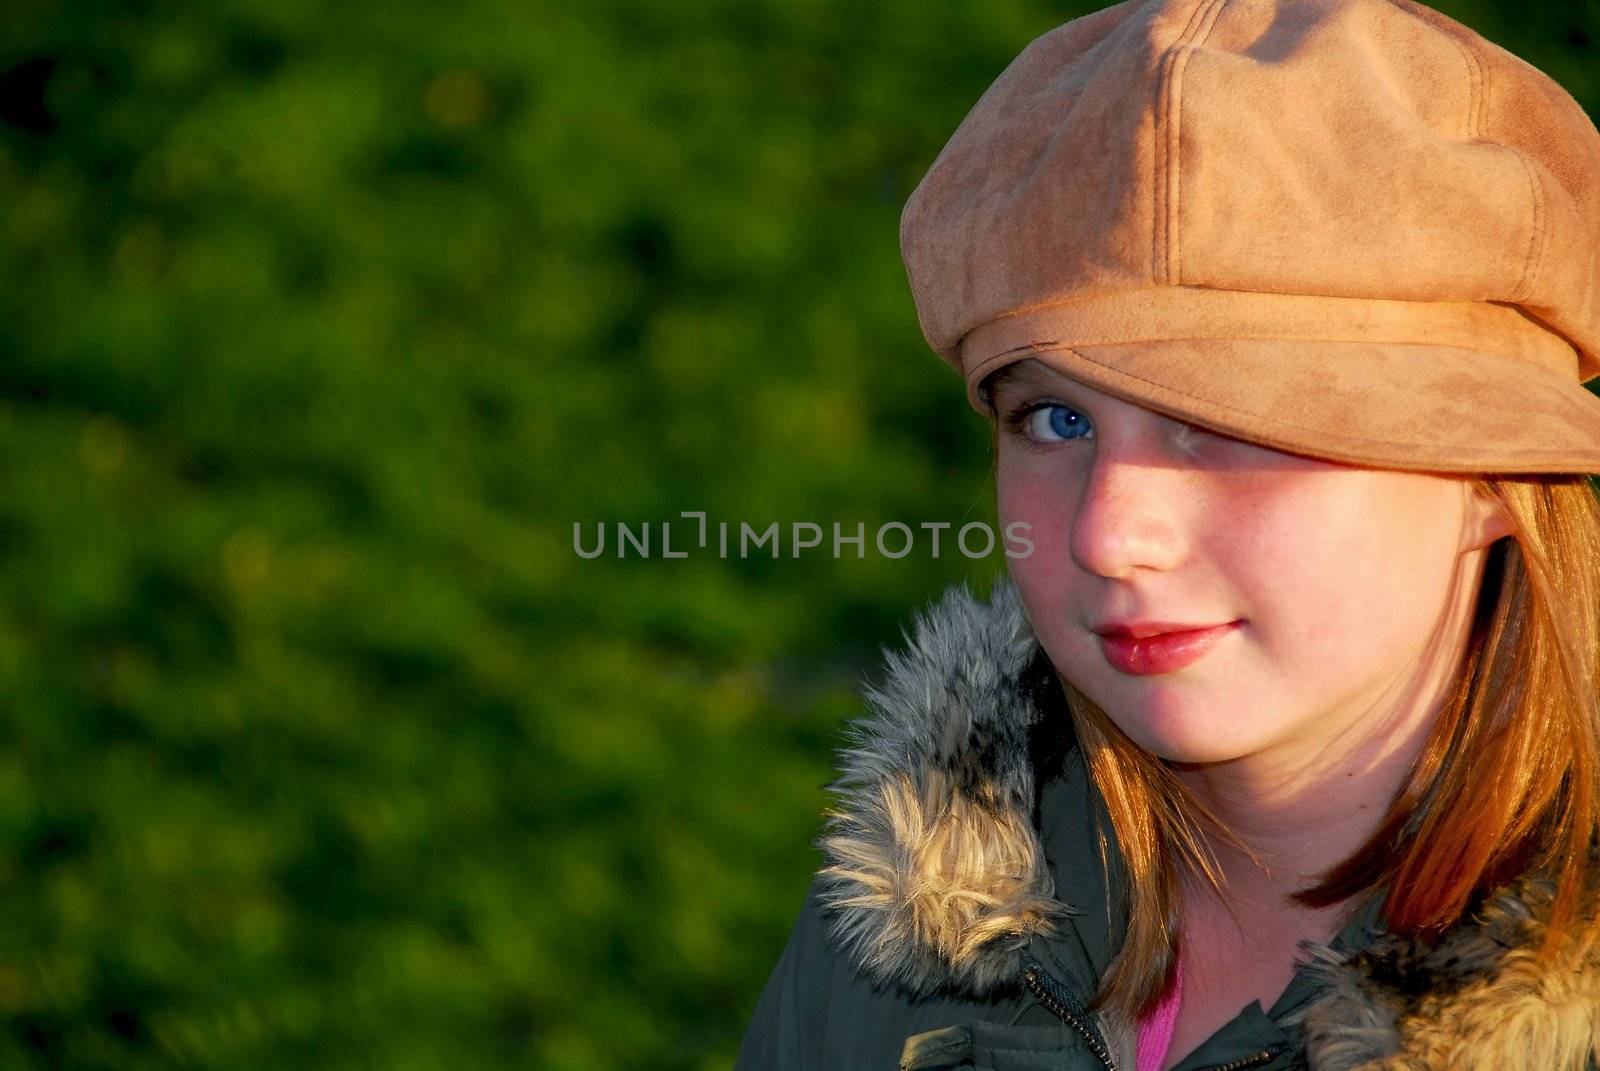 Portriat of a young smiling girl in fall clothes outside